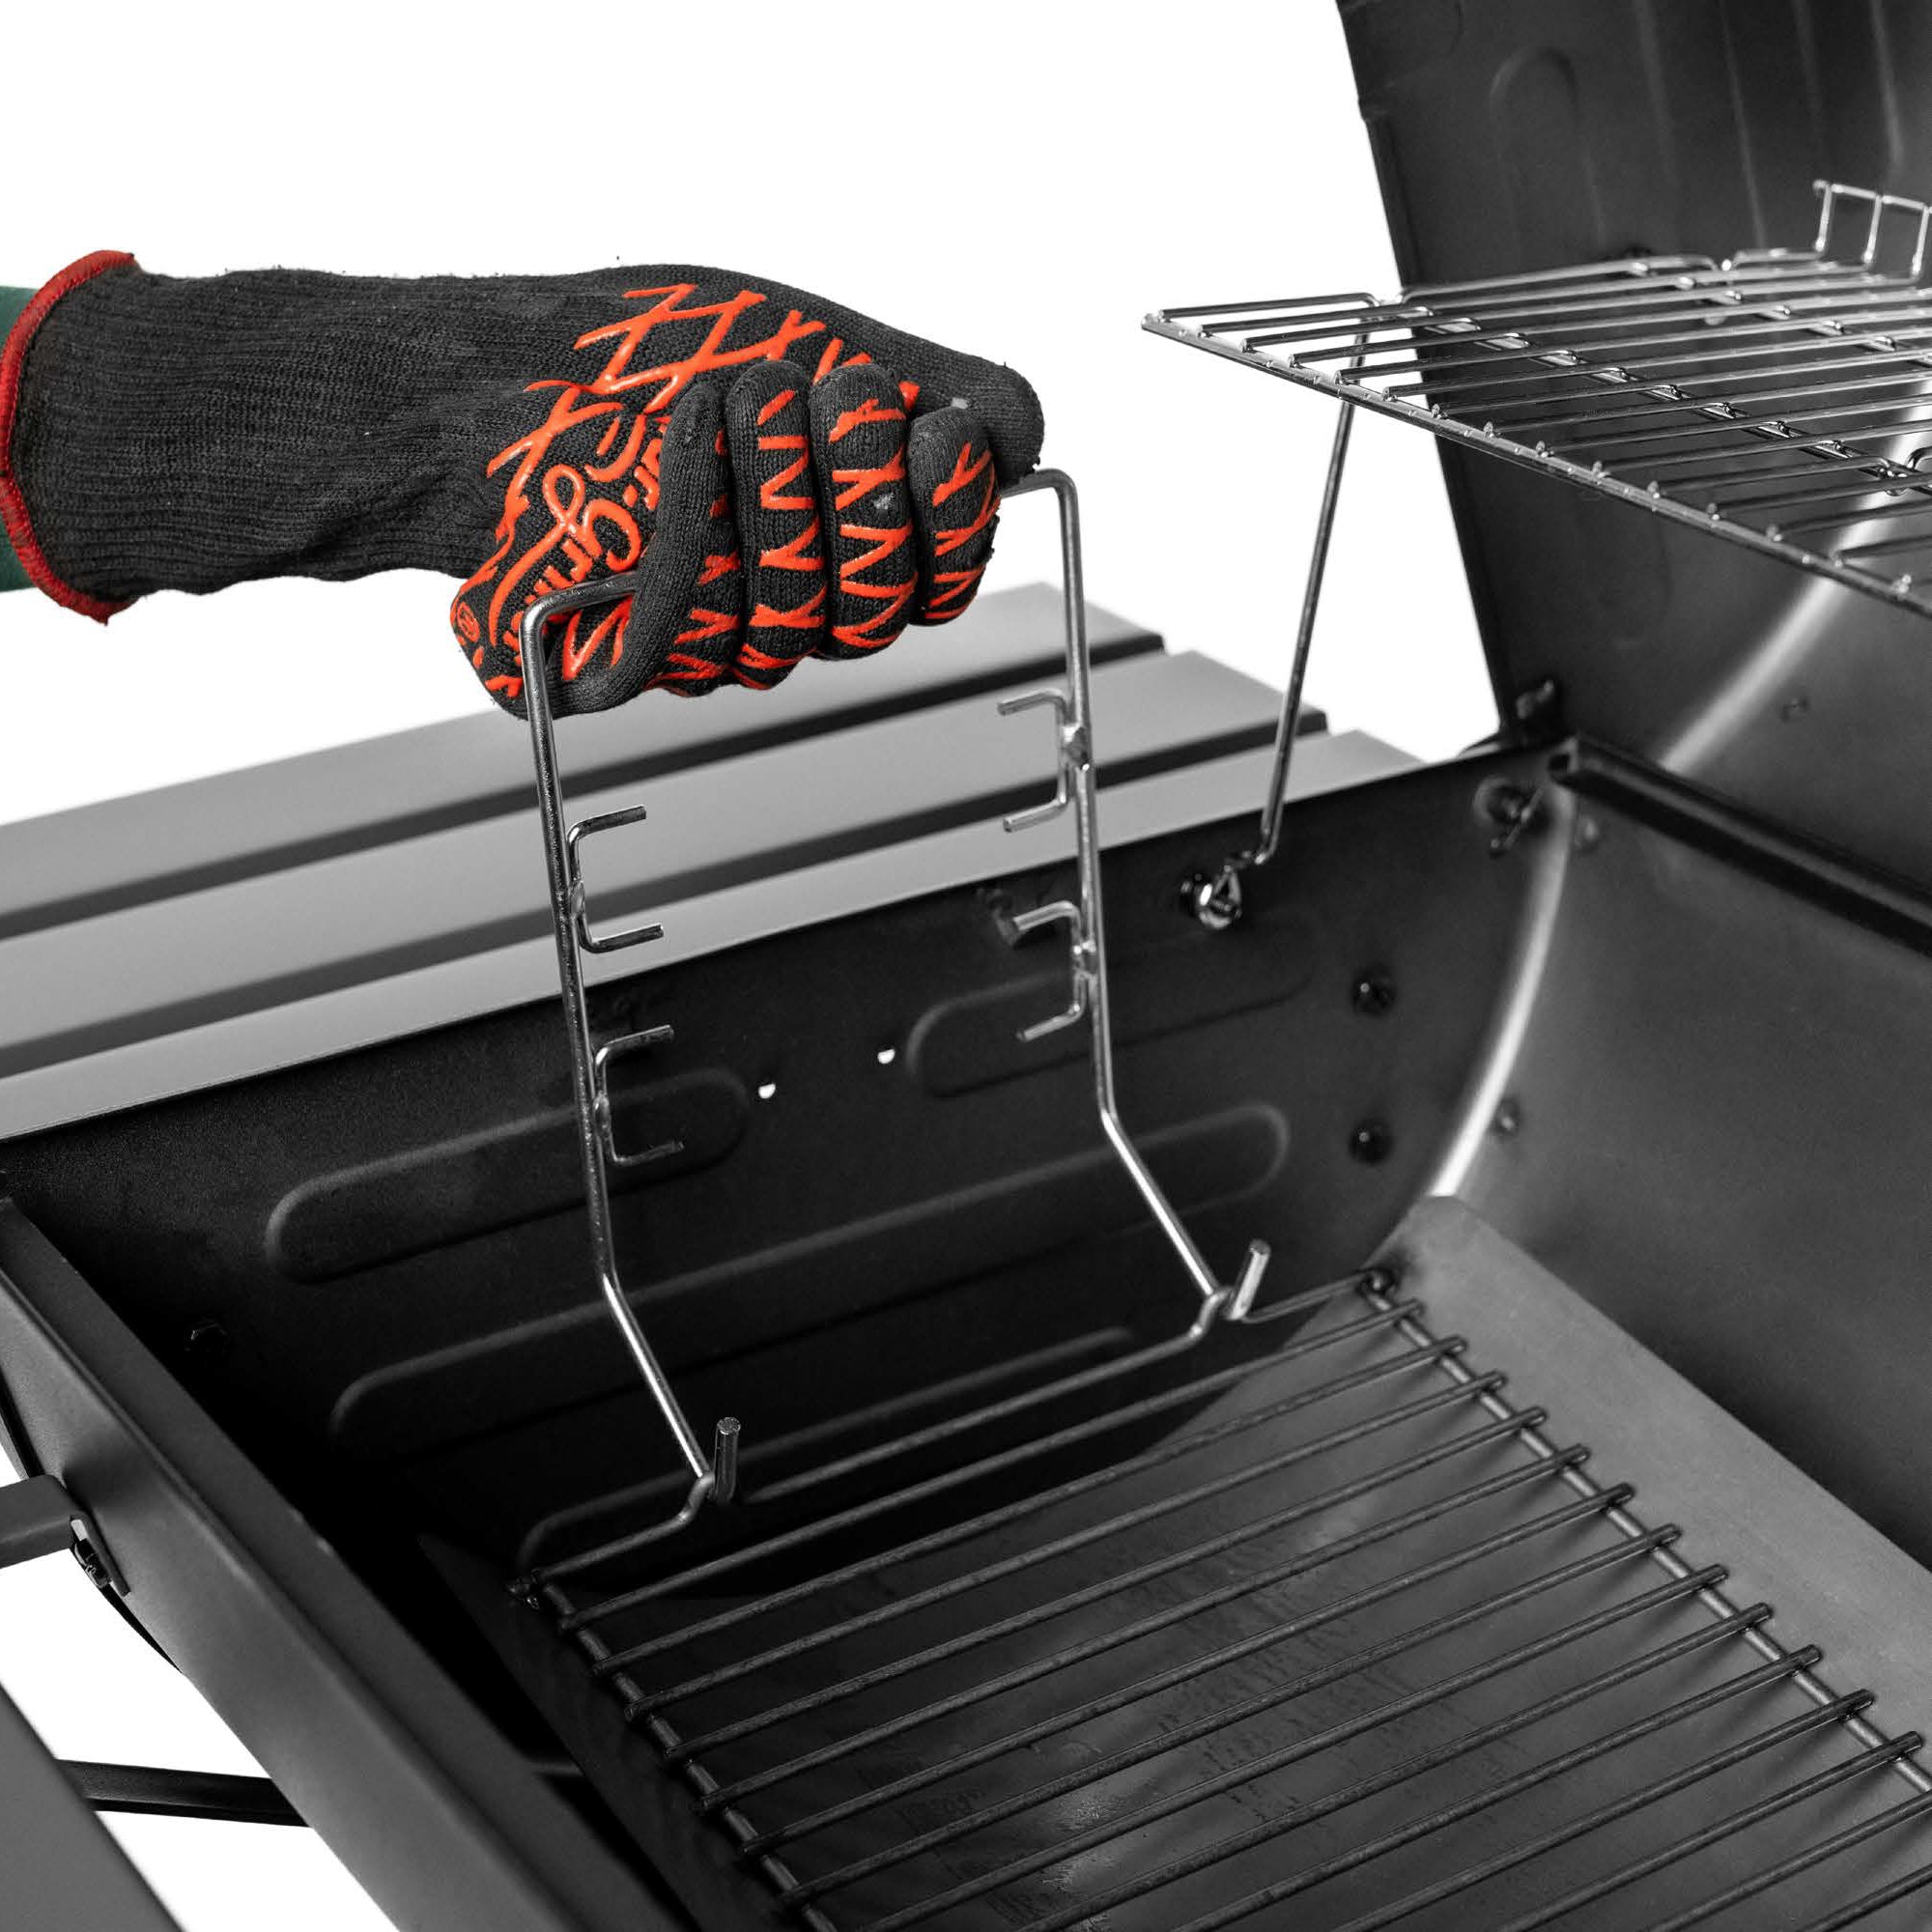 Char-Griller Super Pro® Charcoal Grill